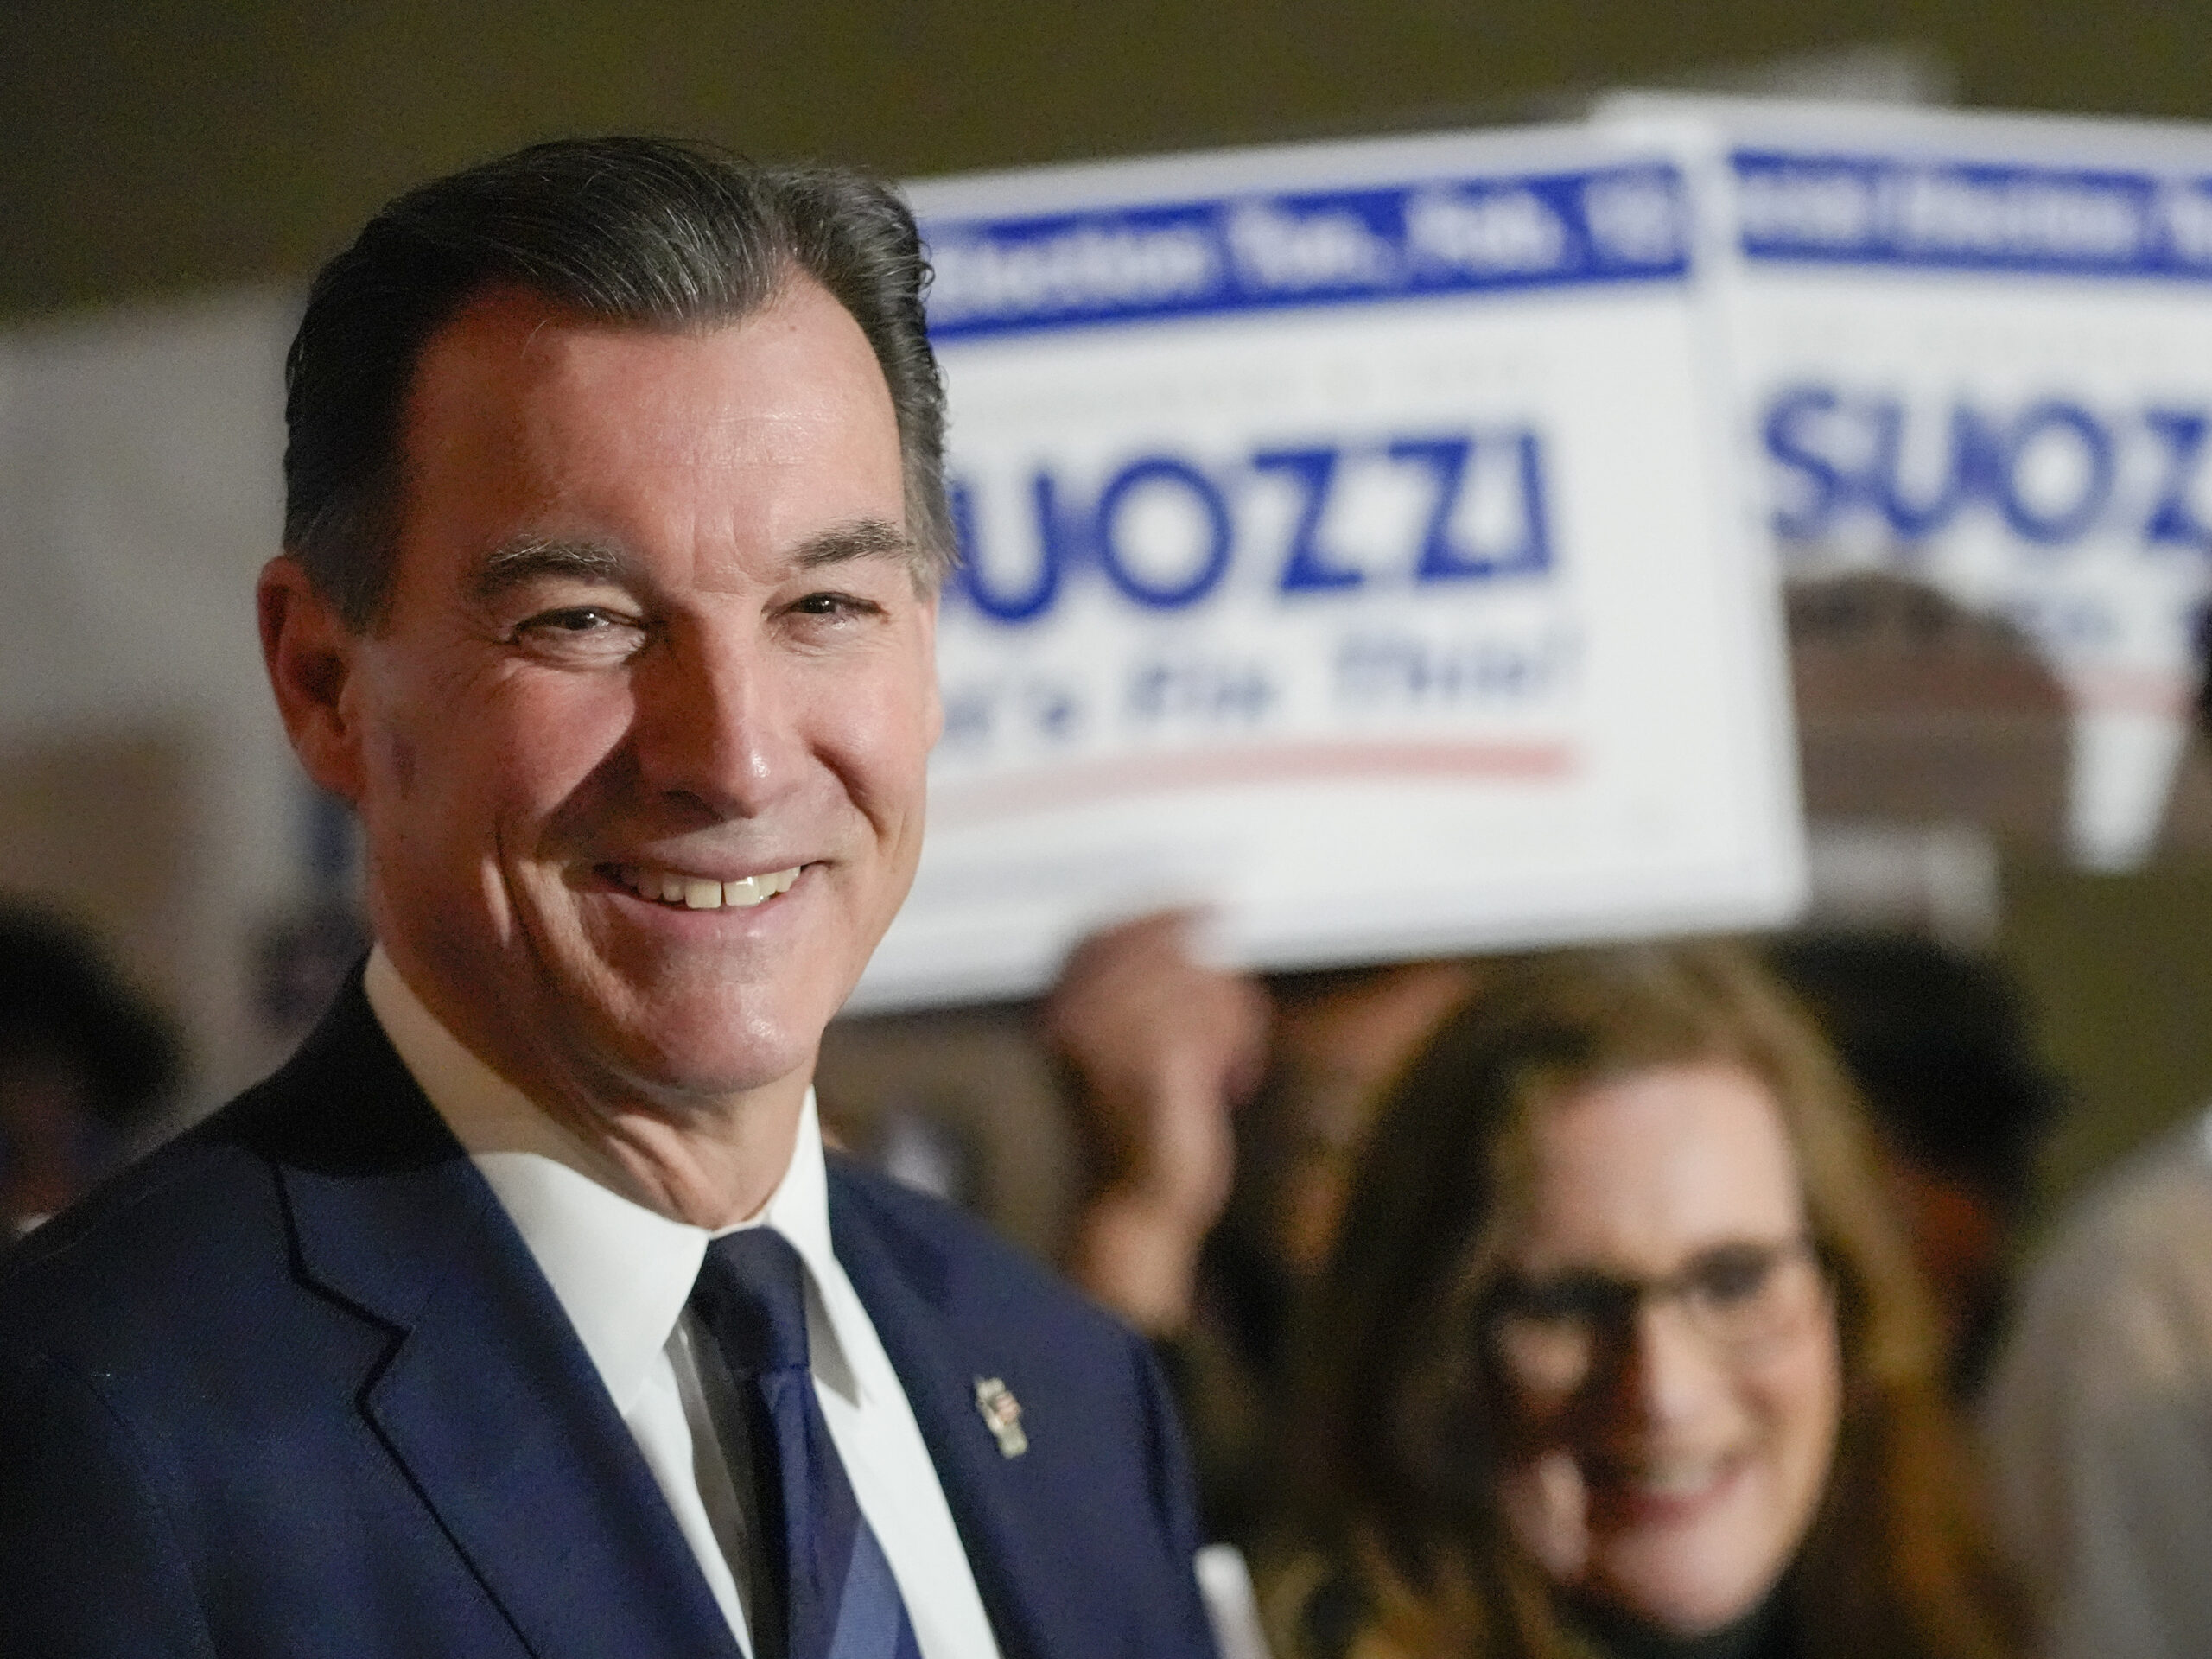 Democrat Suozzi wins special election to replace Santos in New York